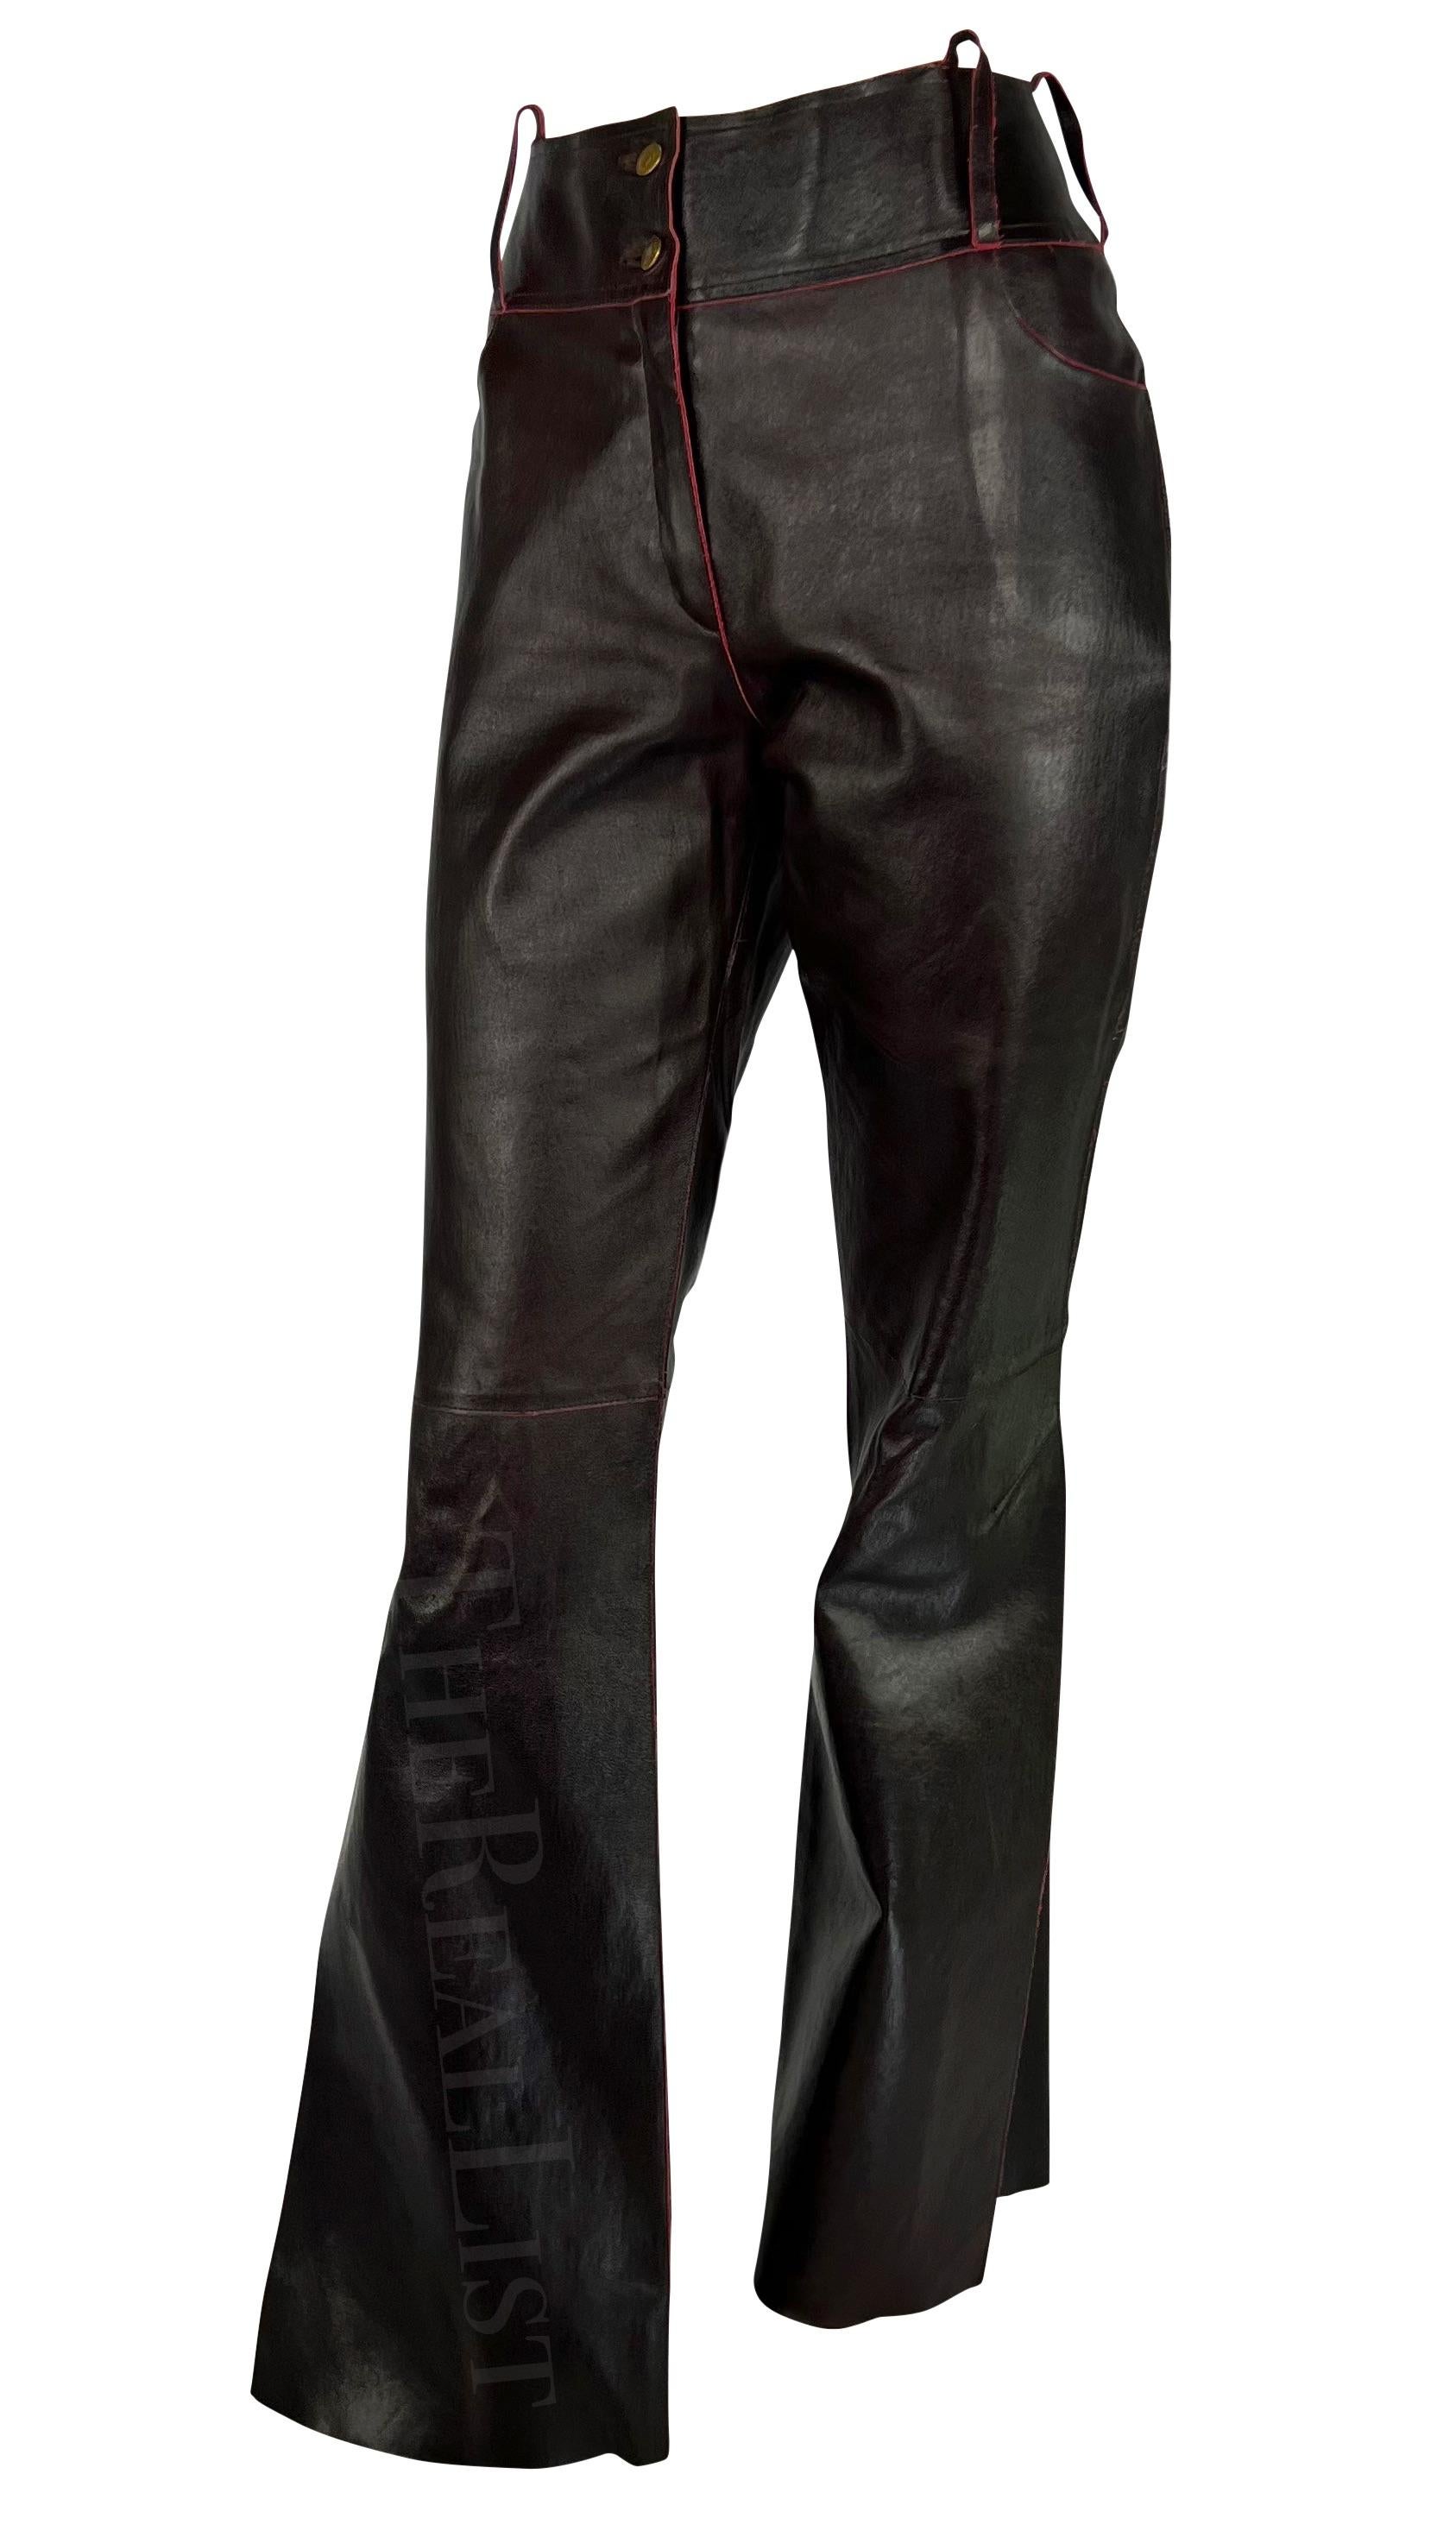 Presenting a fabulous pair of brown/red leather Christian Dior pants, designed by John Galliano. From the Fall/Winter 2001 collection, these pants are constructed entirely of brown leather with red undertones that are highlighted when the pants